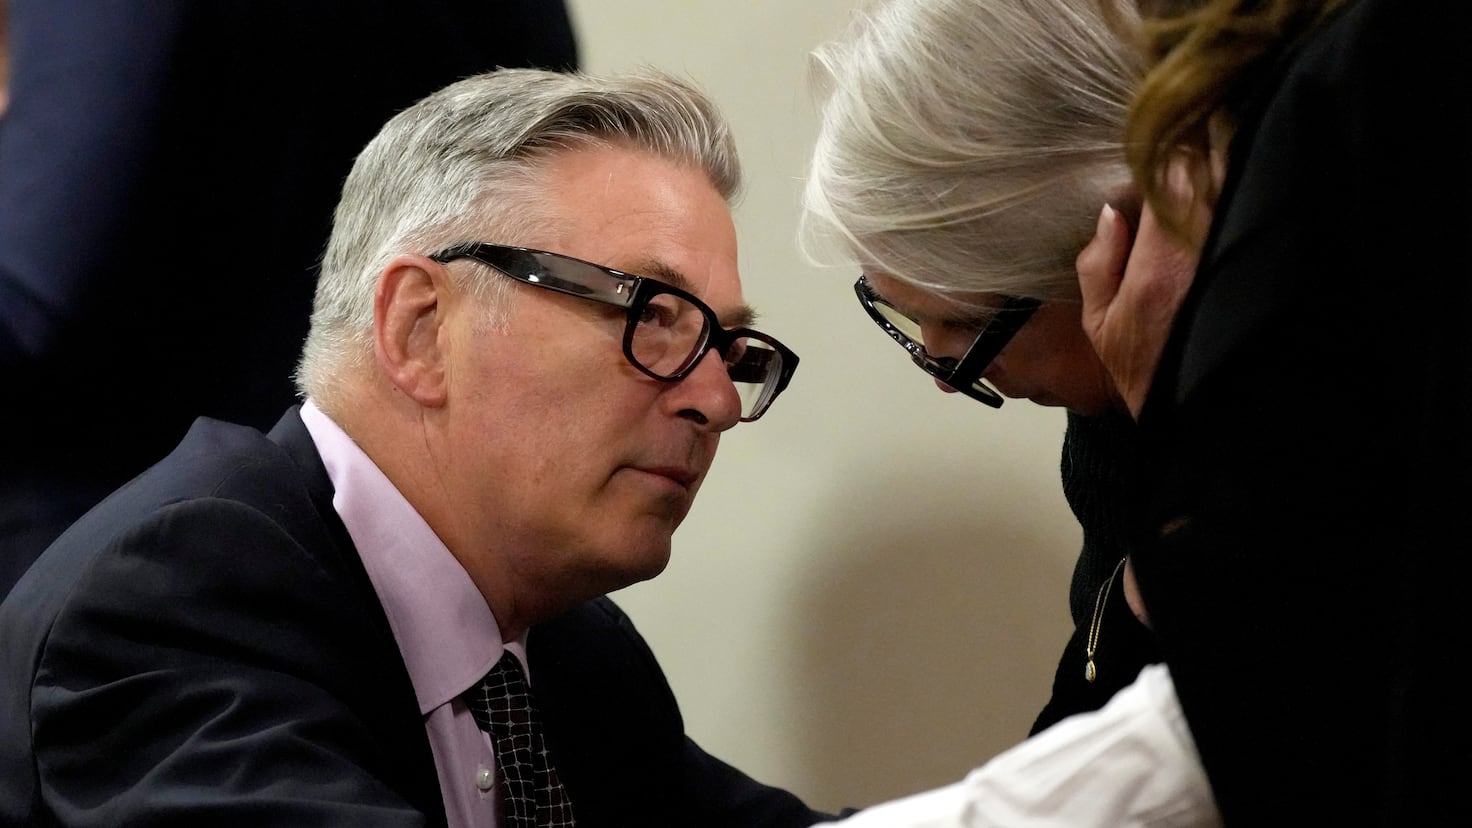 Alec Baldwin trial live updates: statements, reactions, jury and latest news